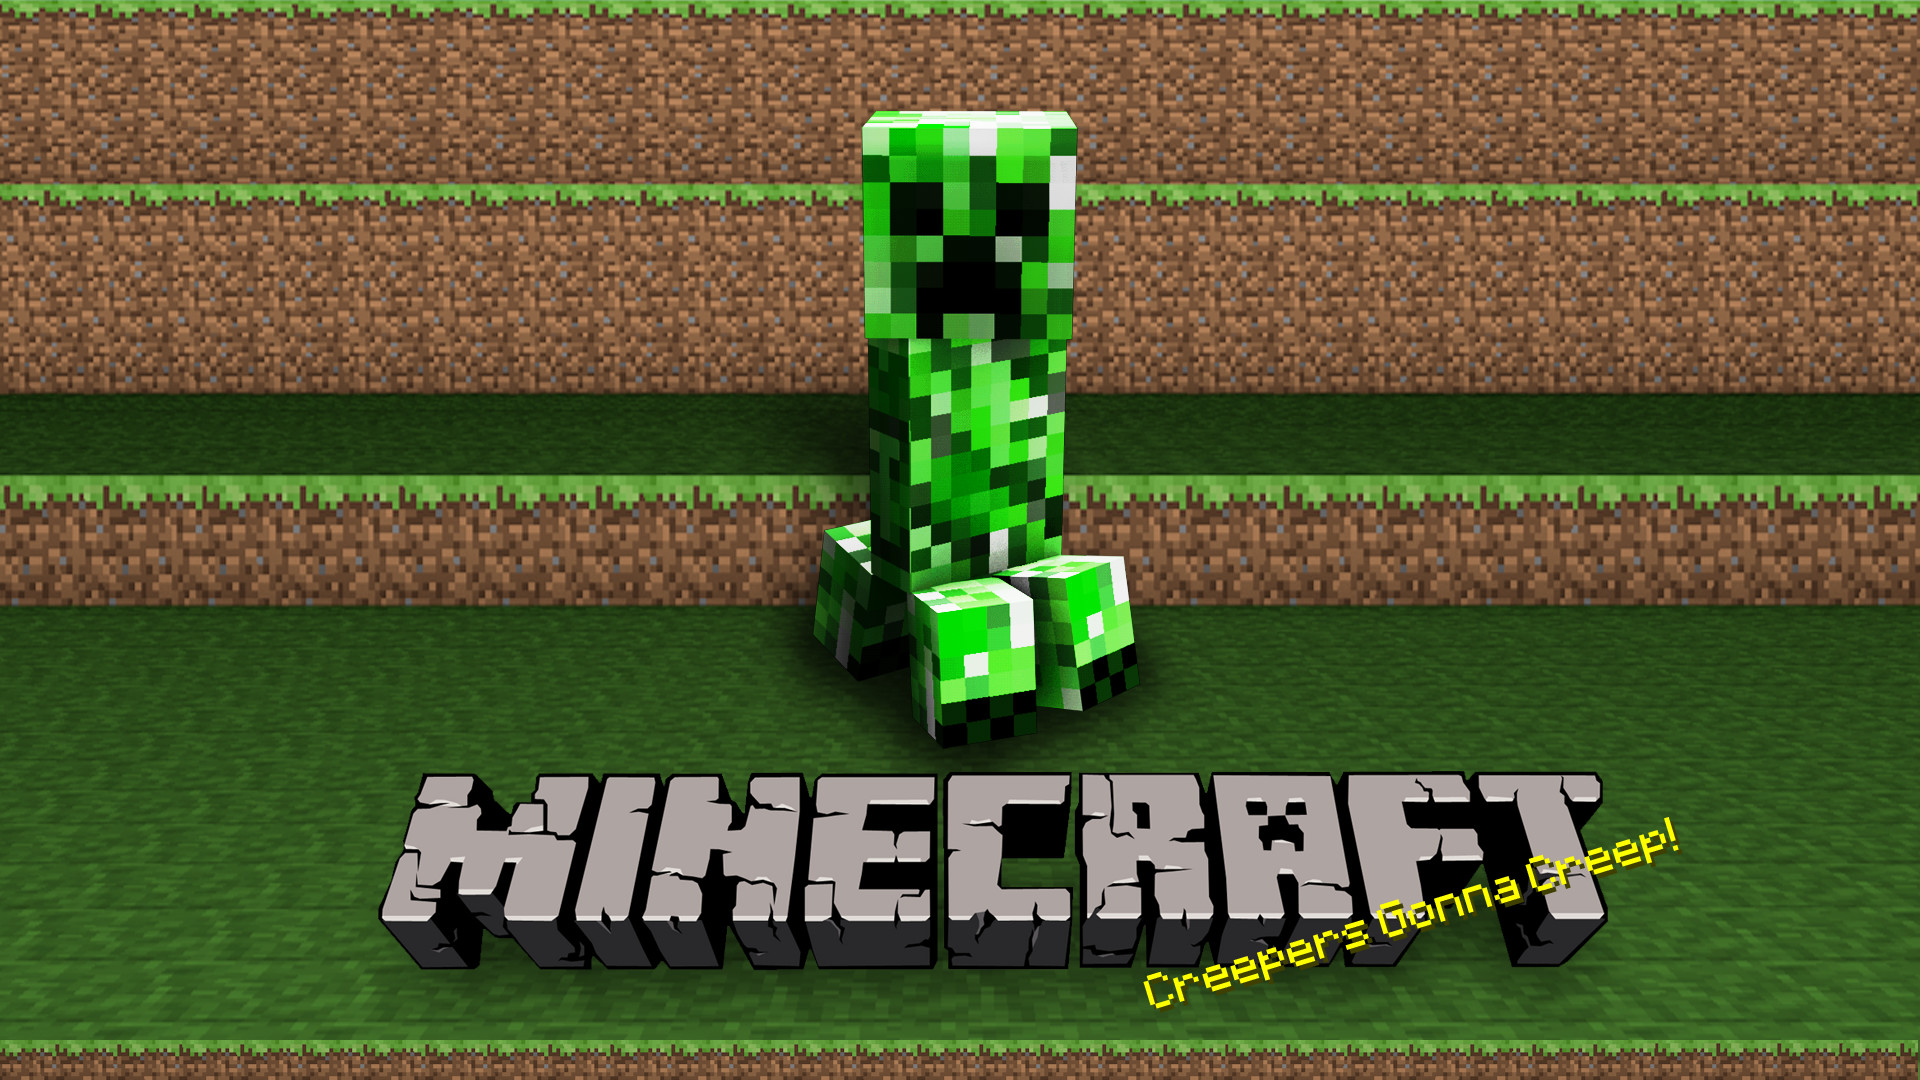 1920x1080, Minecraft Creeper Iphone Wallpaper Download - Video Games In The 2010s - HD Wallpaper 